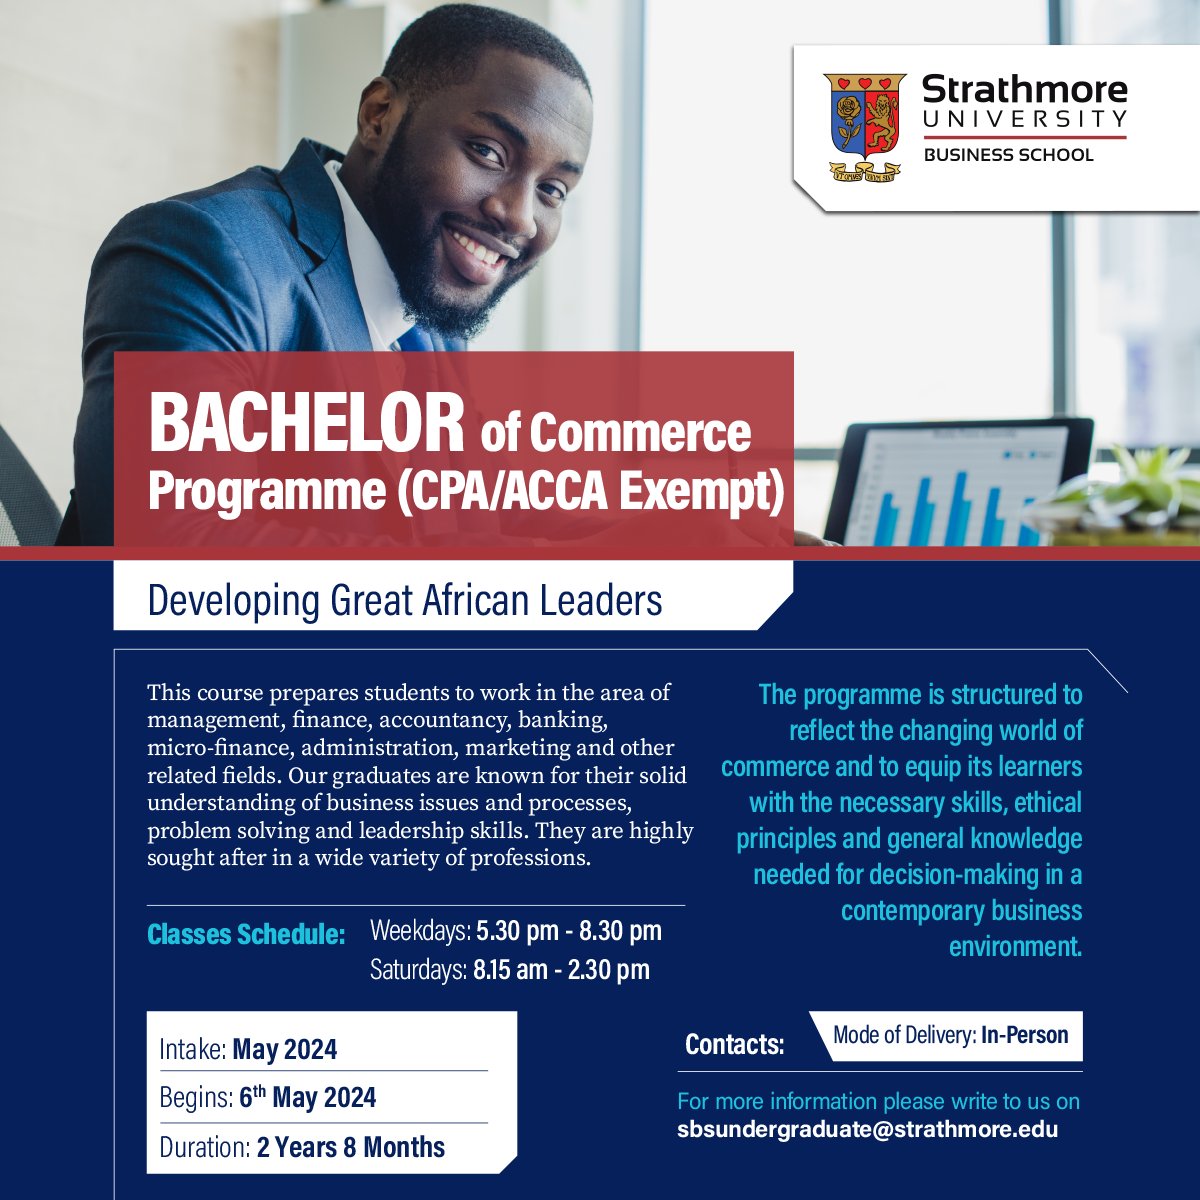 Unlock your pathway to success in the world of finance & accounting with our comprehensive #BachelorofCommerce Programme (CPA/ACCA) Exempt & gain invaluable knowledge and skills while accelerating your professional journey. Apply today! sbs.strathmore.edu/bachelor-of-co… #BCOM